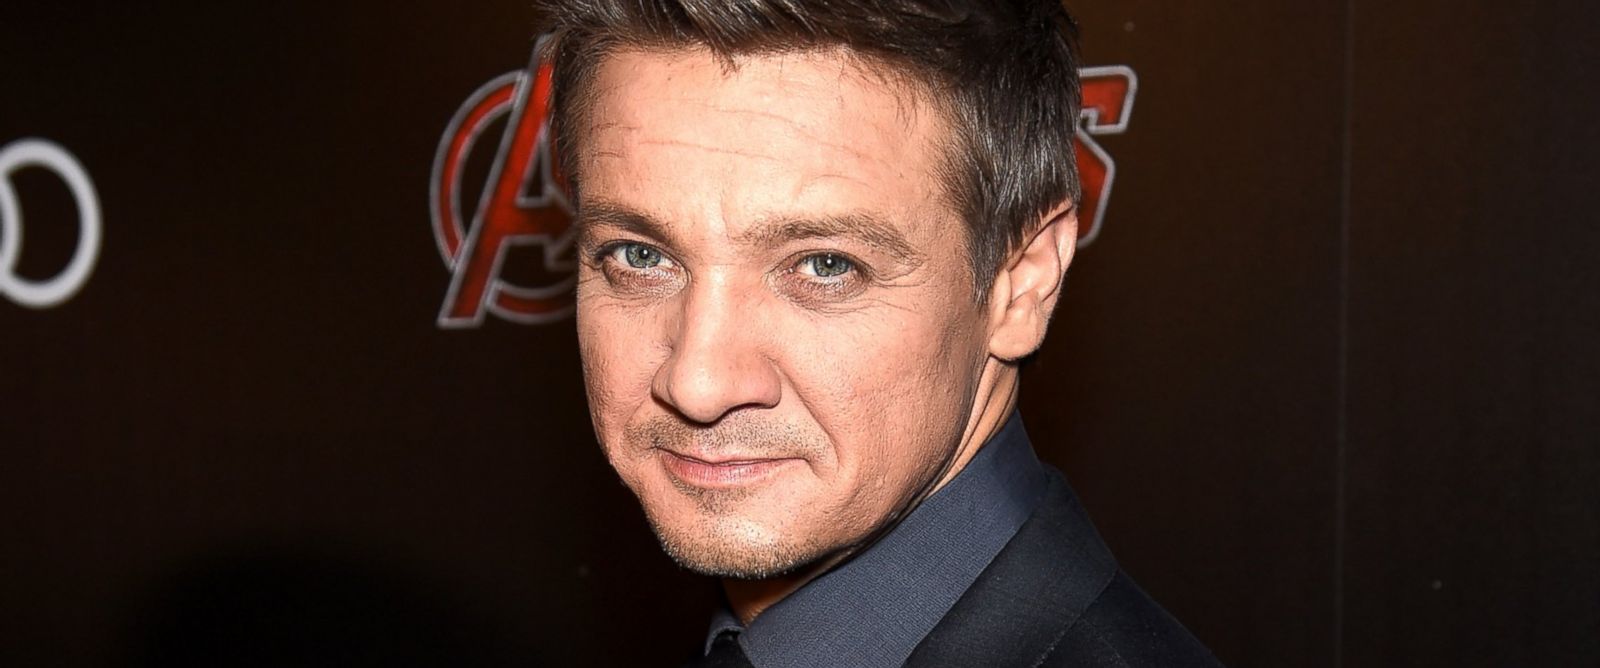 Amazing Jeremy Renner Pictures & Backgrounds